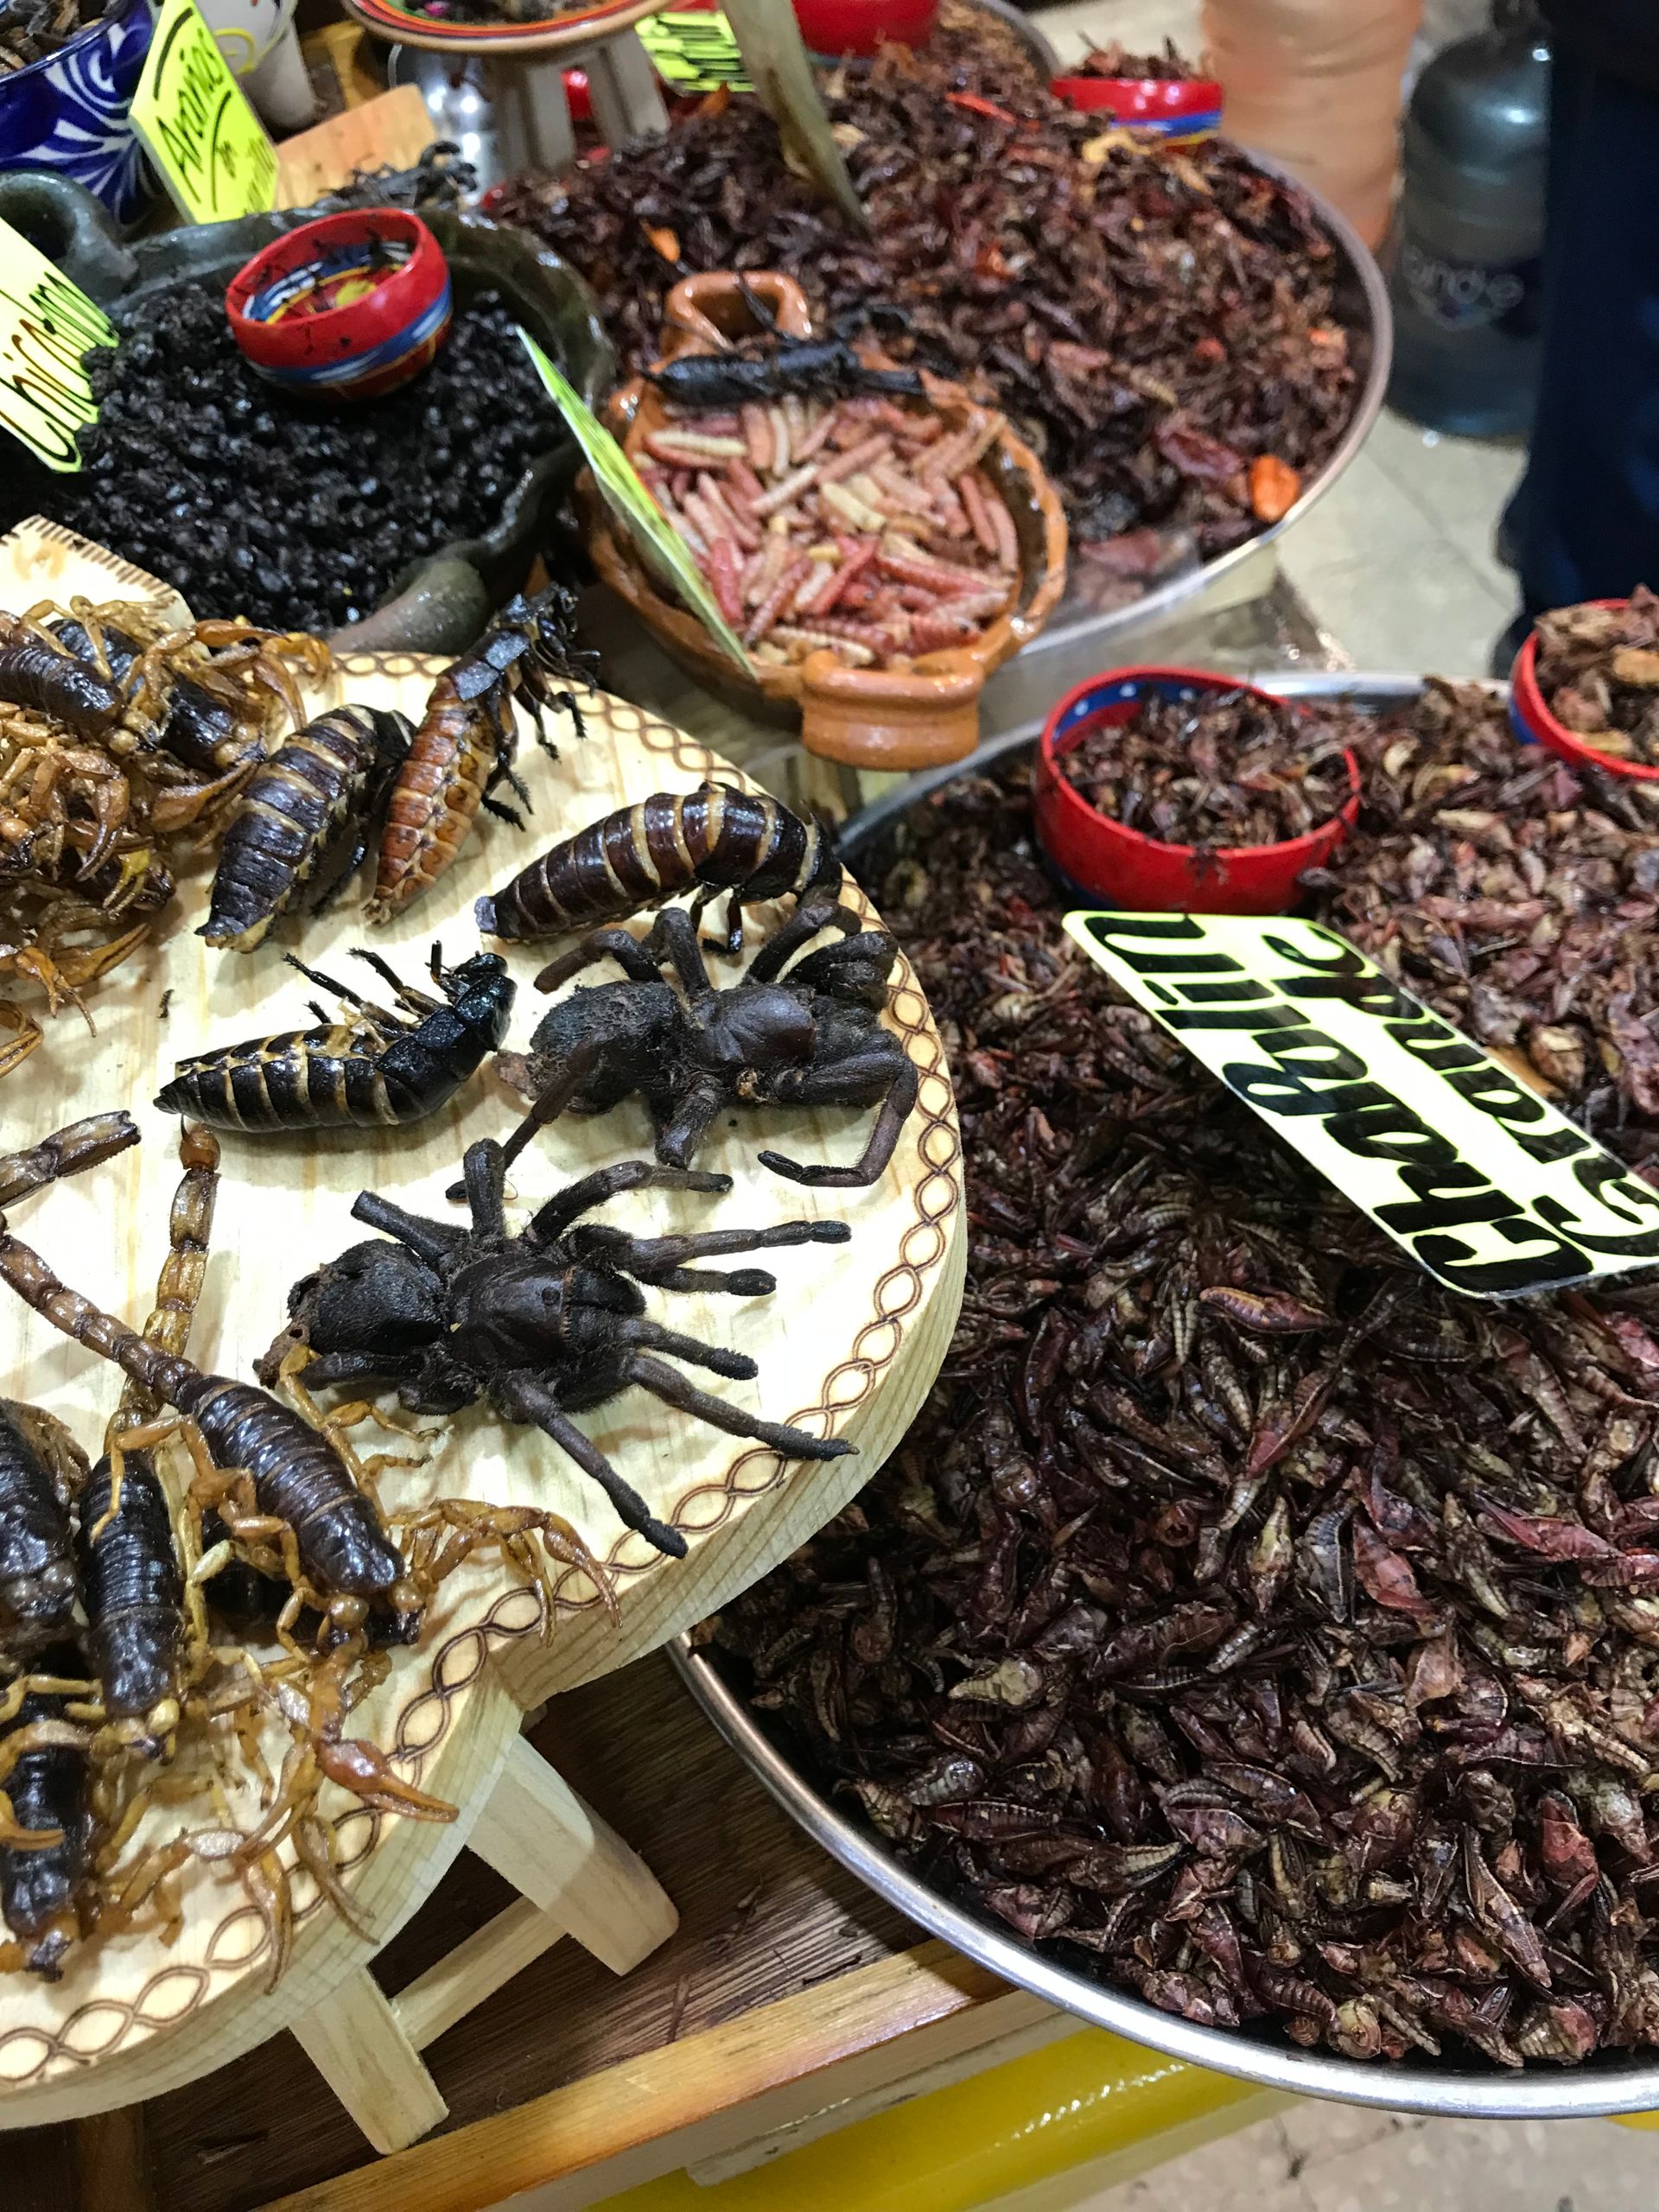 Fried insects at the market